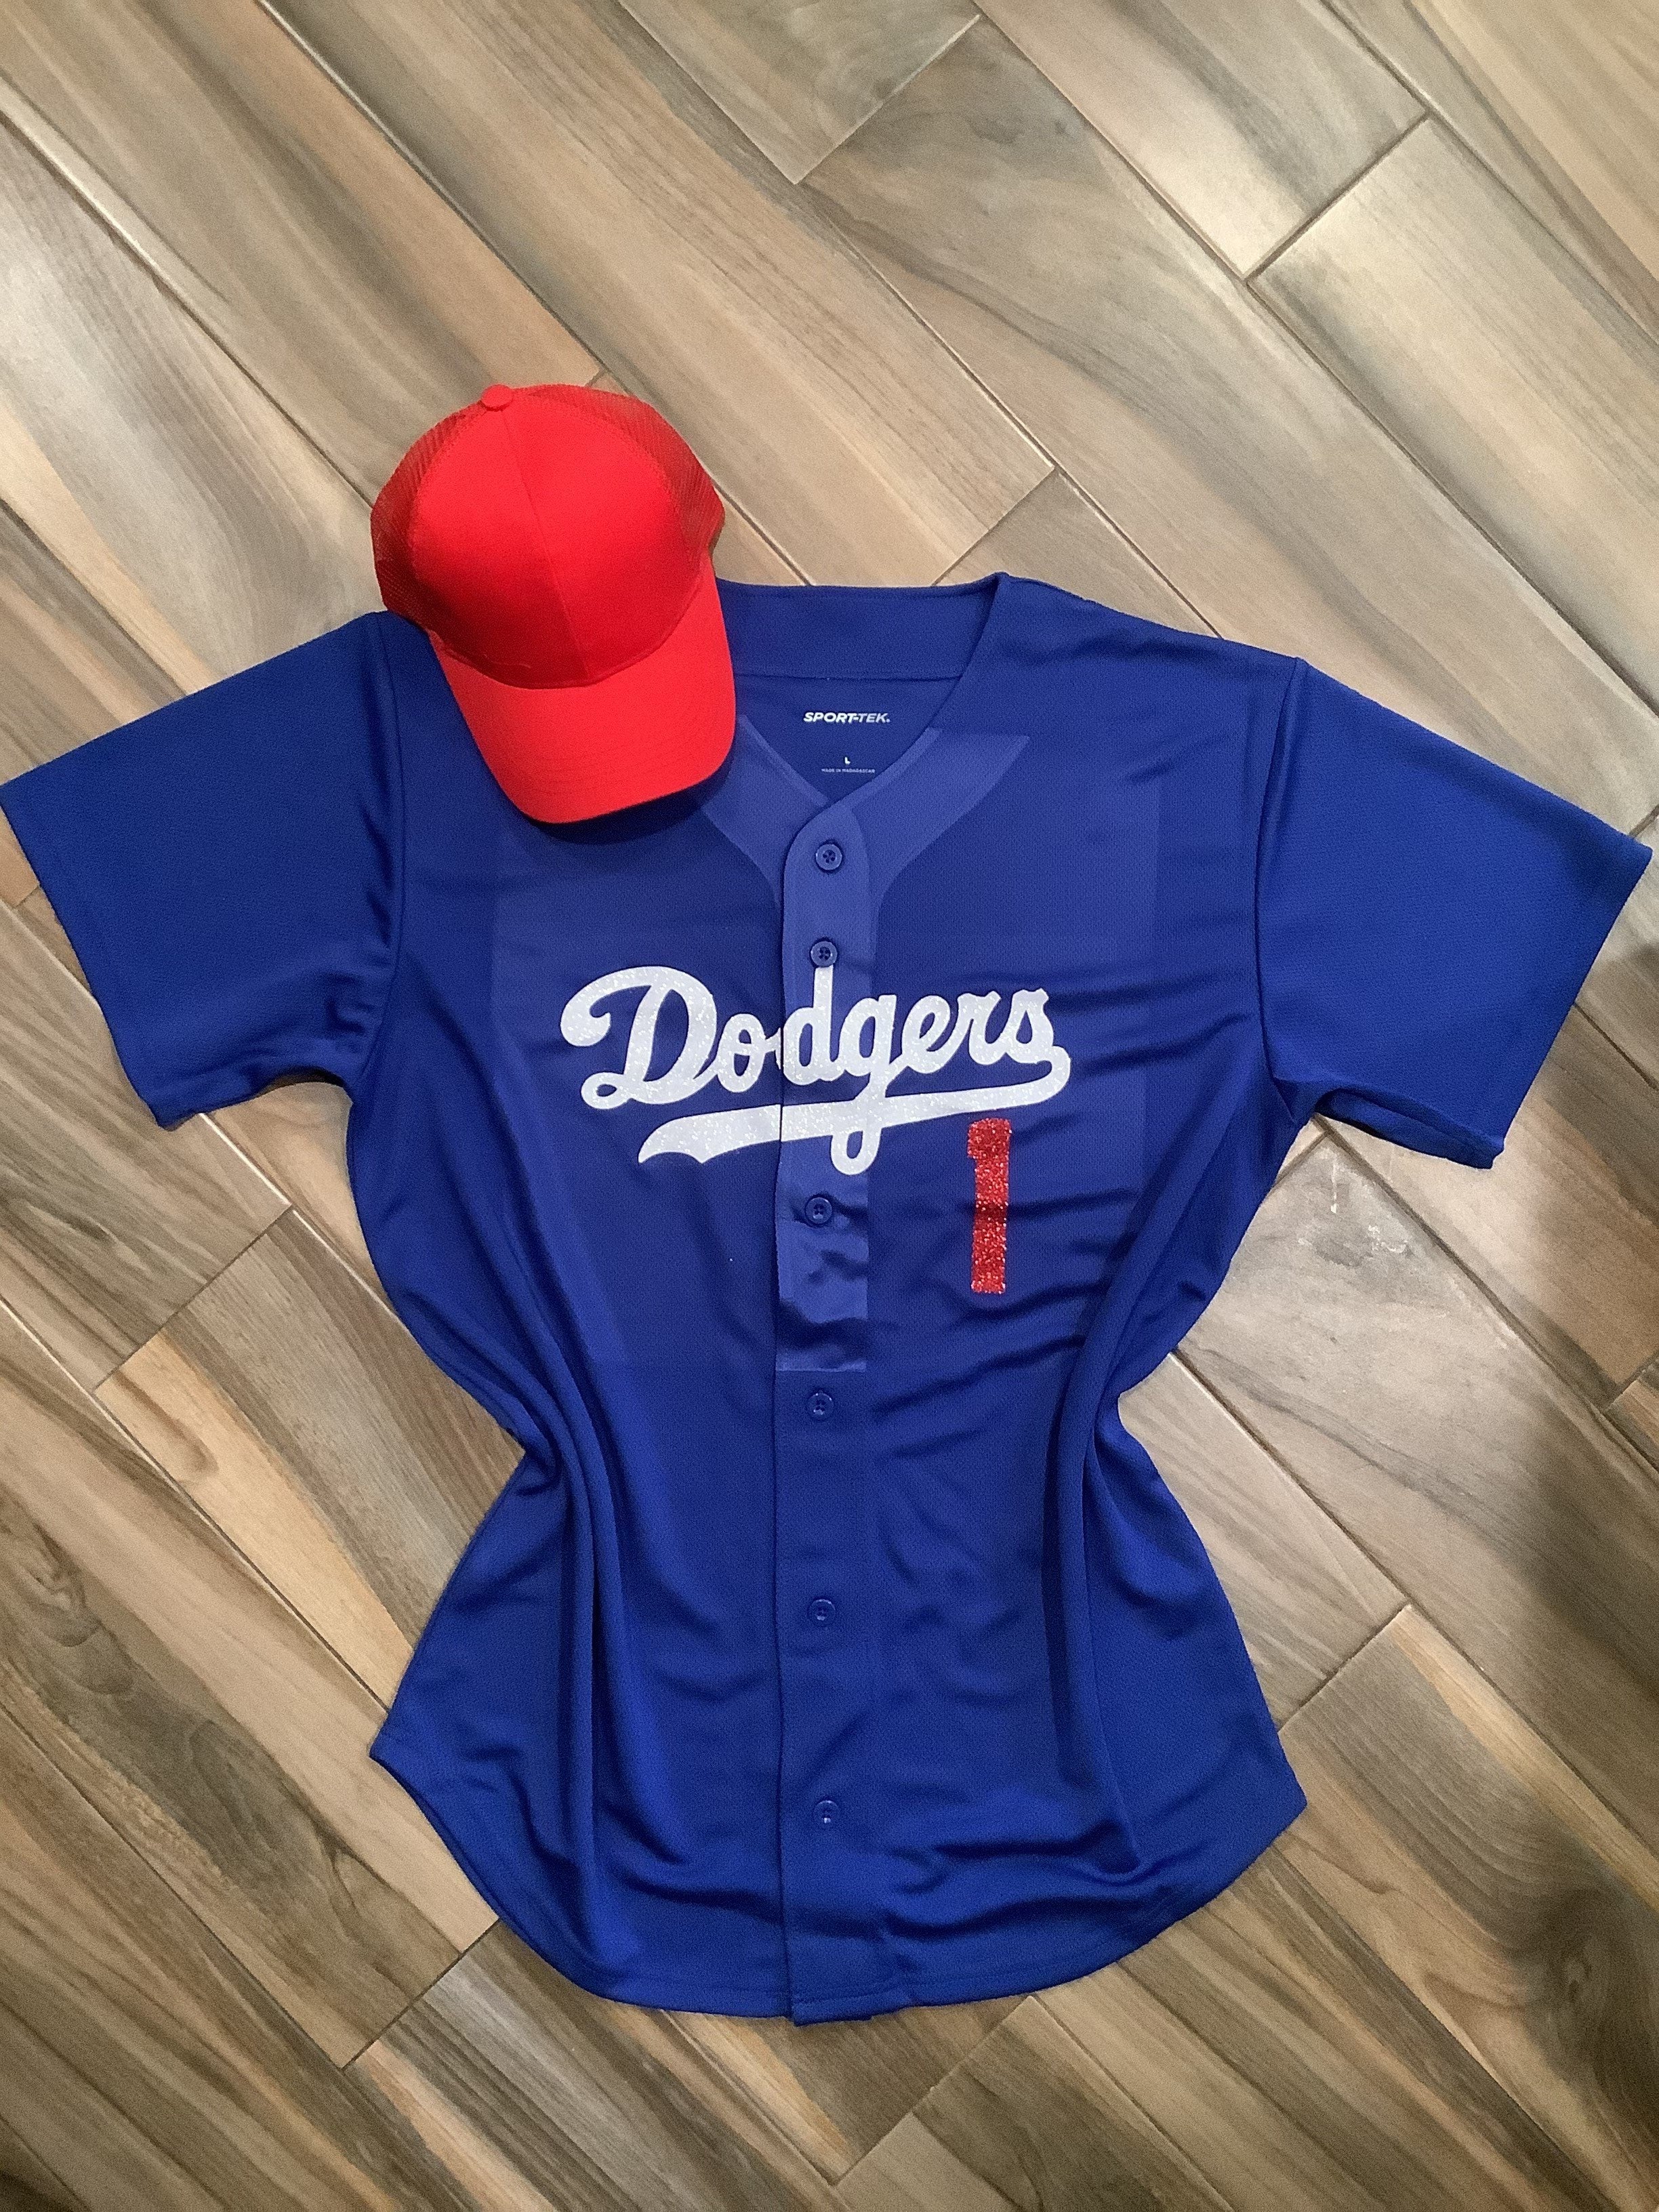 Official L.A. Dodgers Gear, Dodgers Jerseys, Store, Dodgers Gifts, Apparel